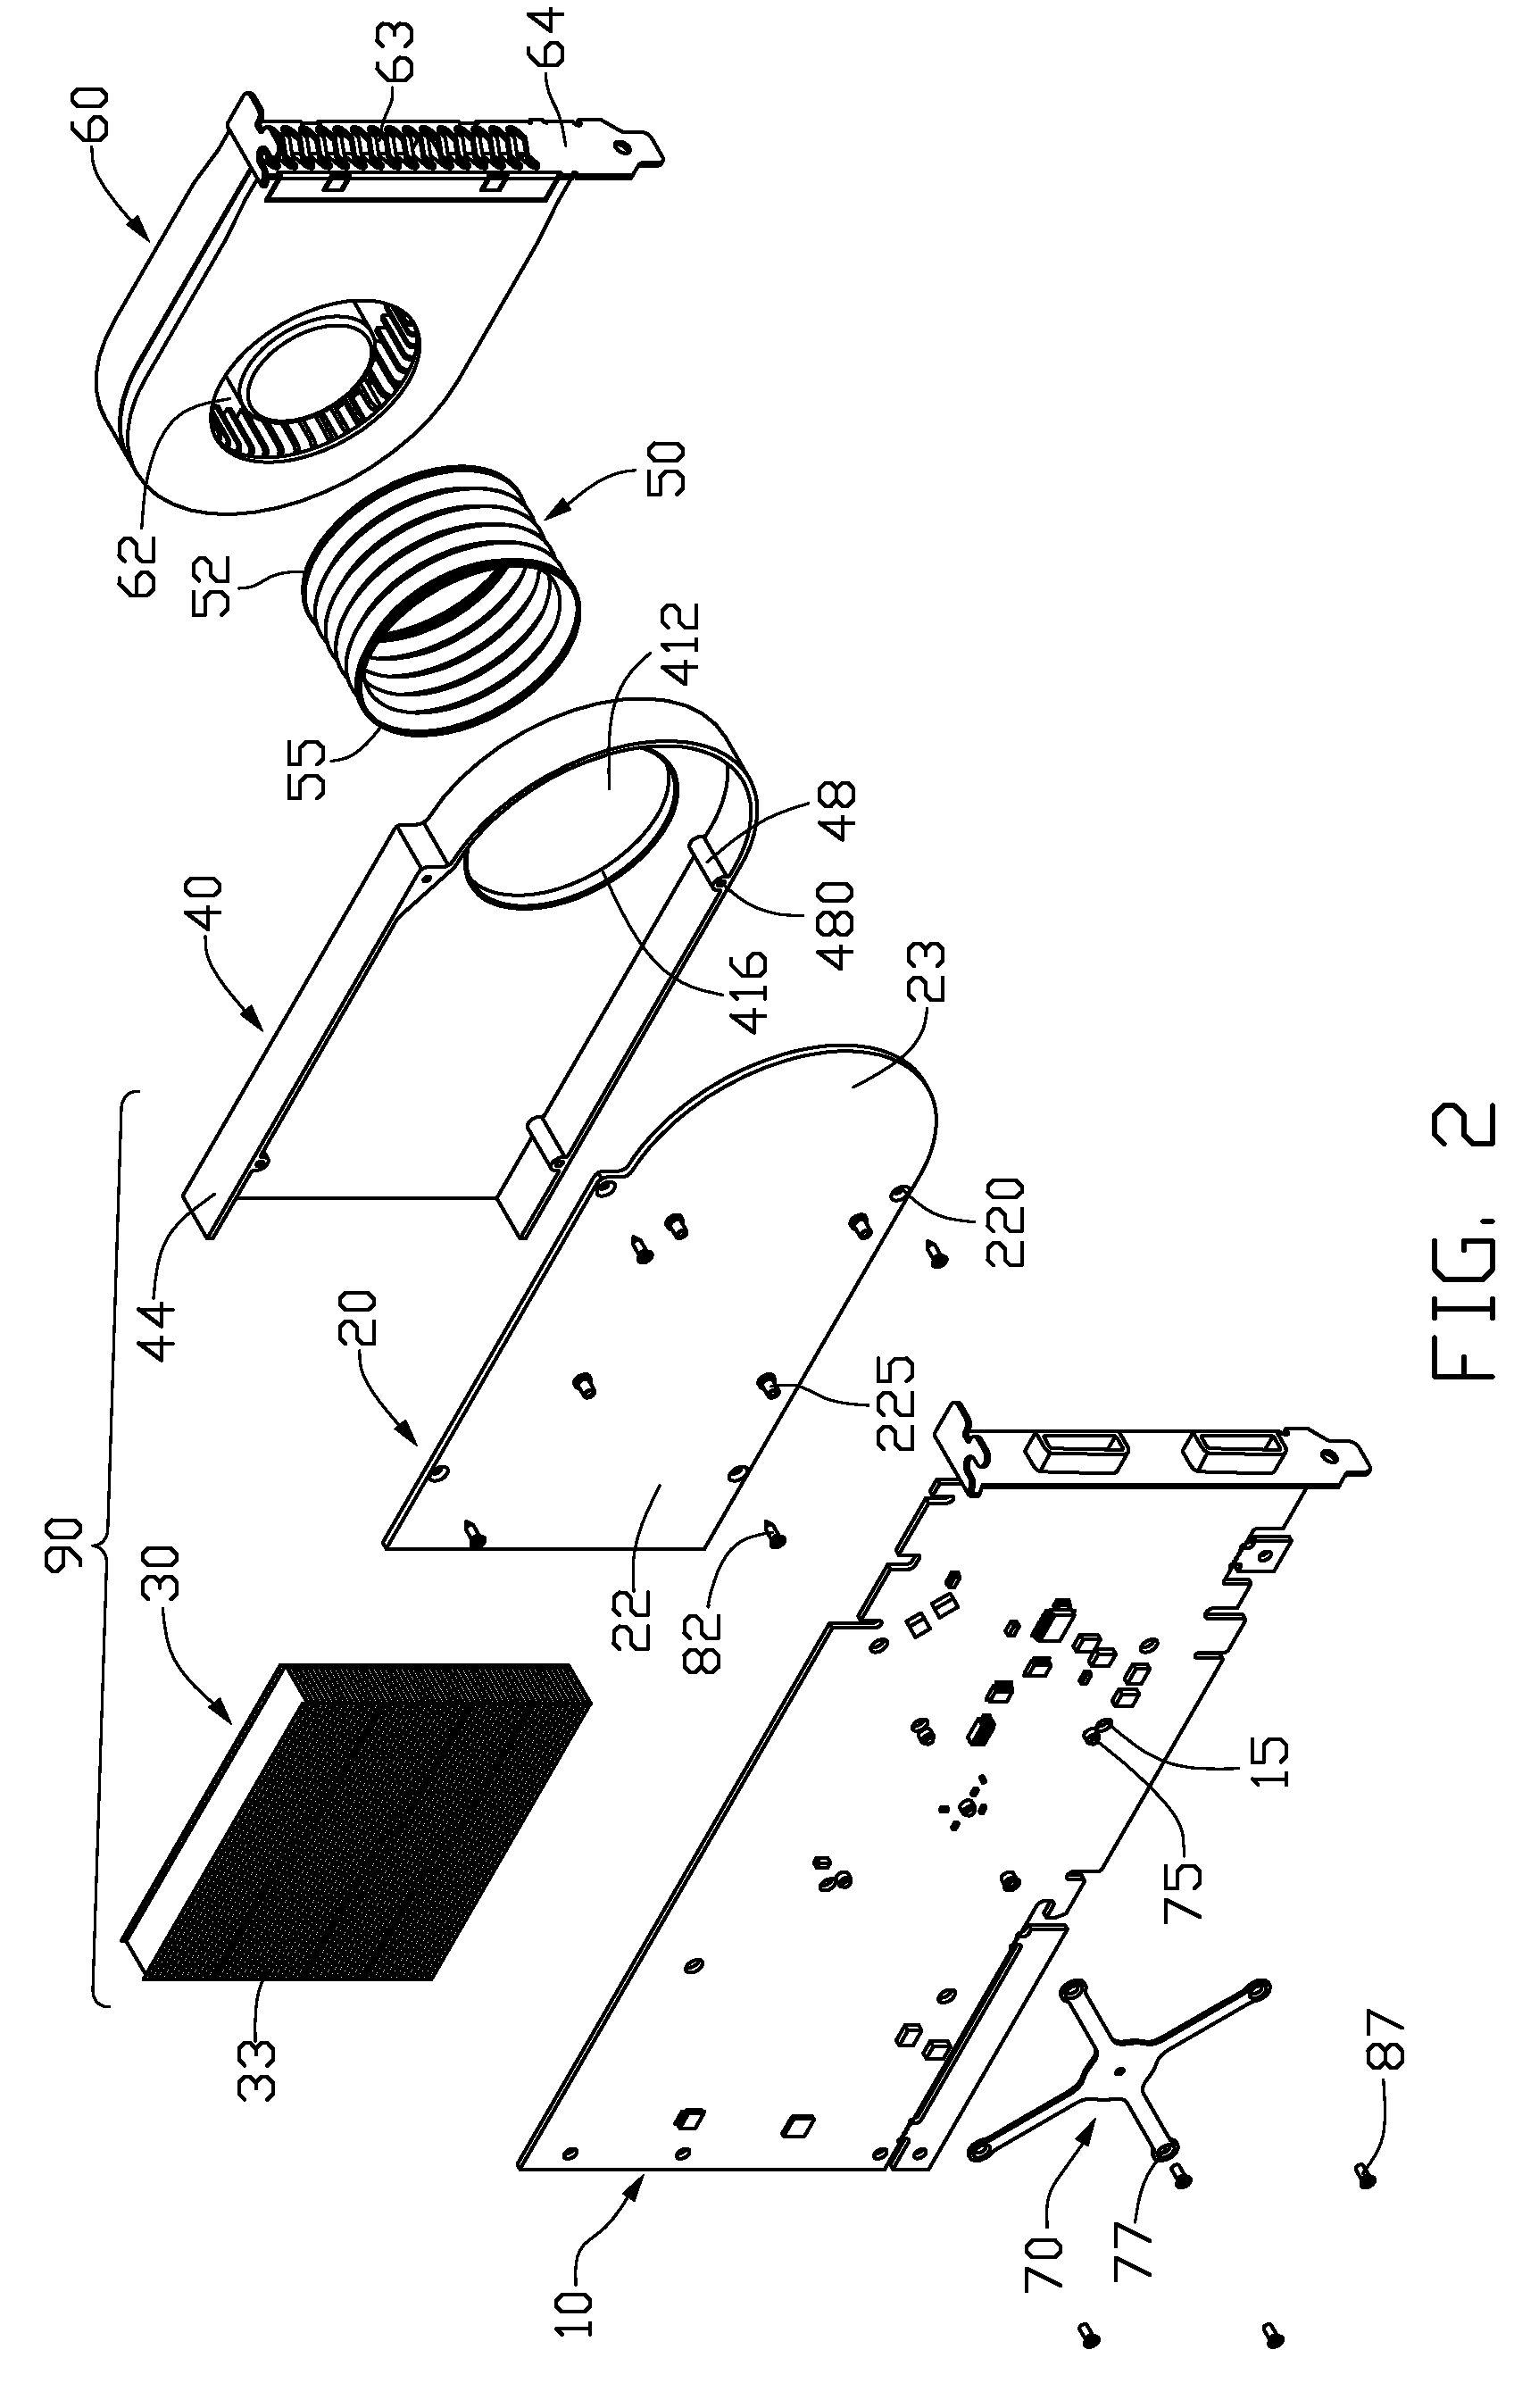 Heat dissipation device for computer add-on cards